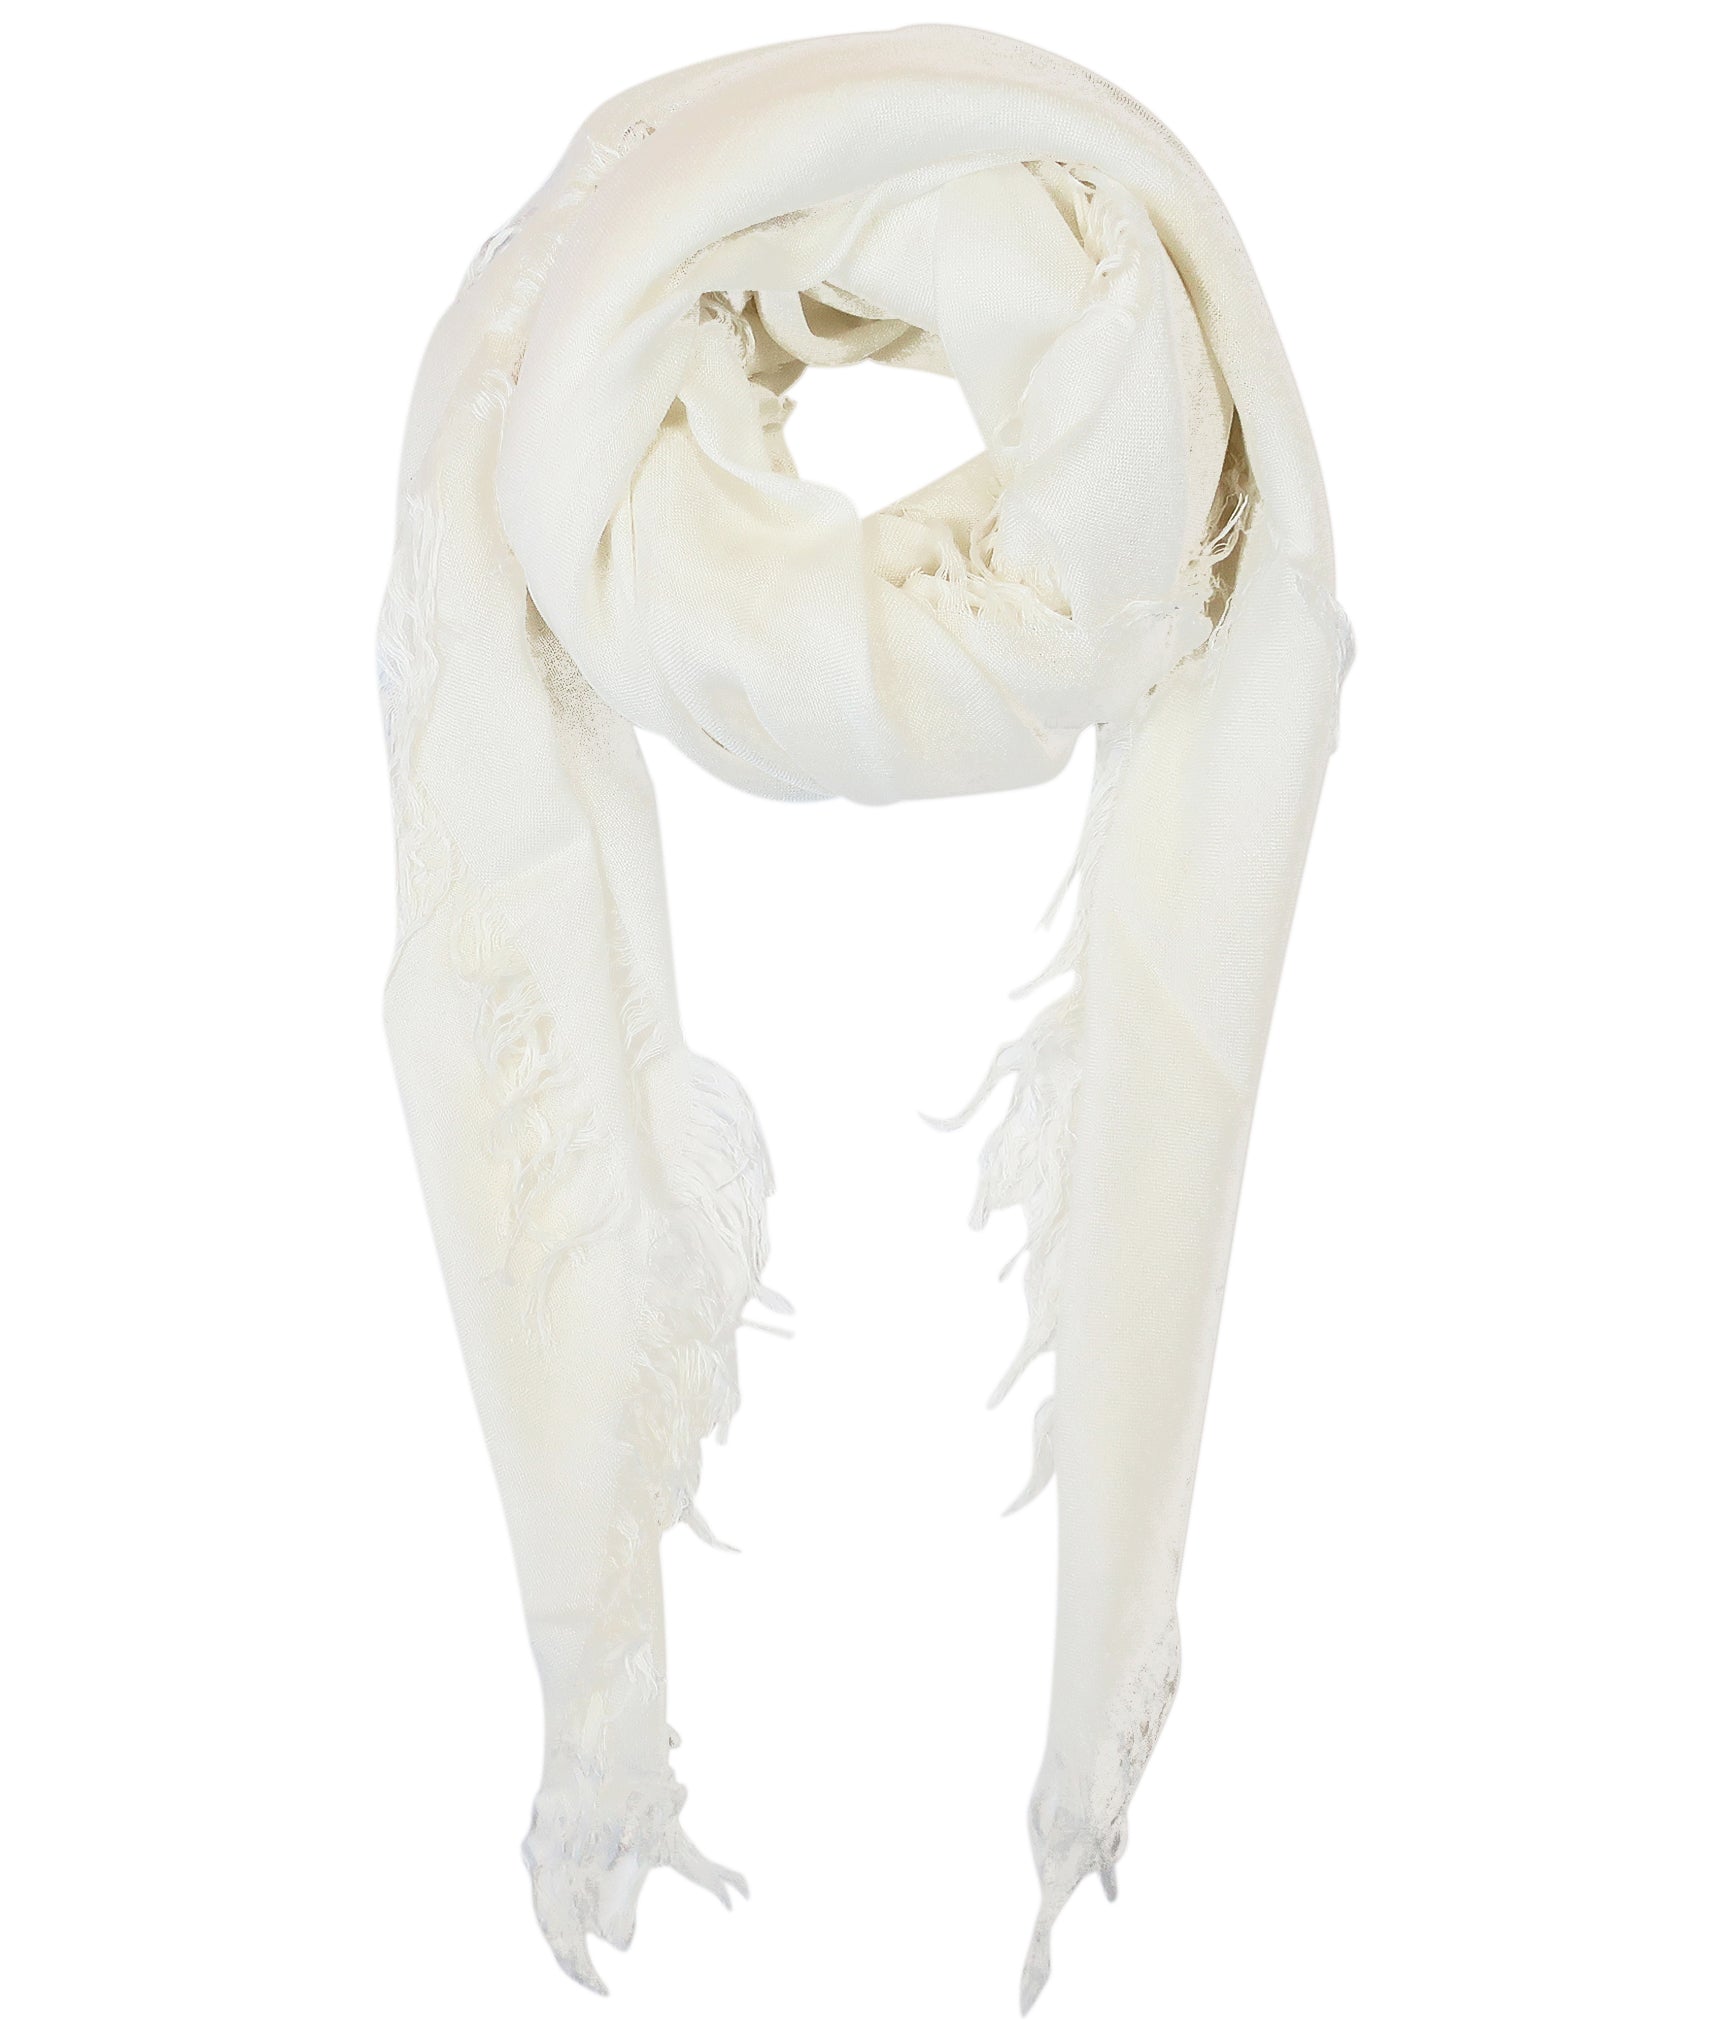 Blue Pacific Tissue Modal and Cashmere Scarf in Cloud Cream White